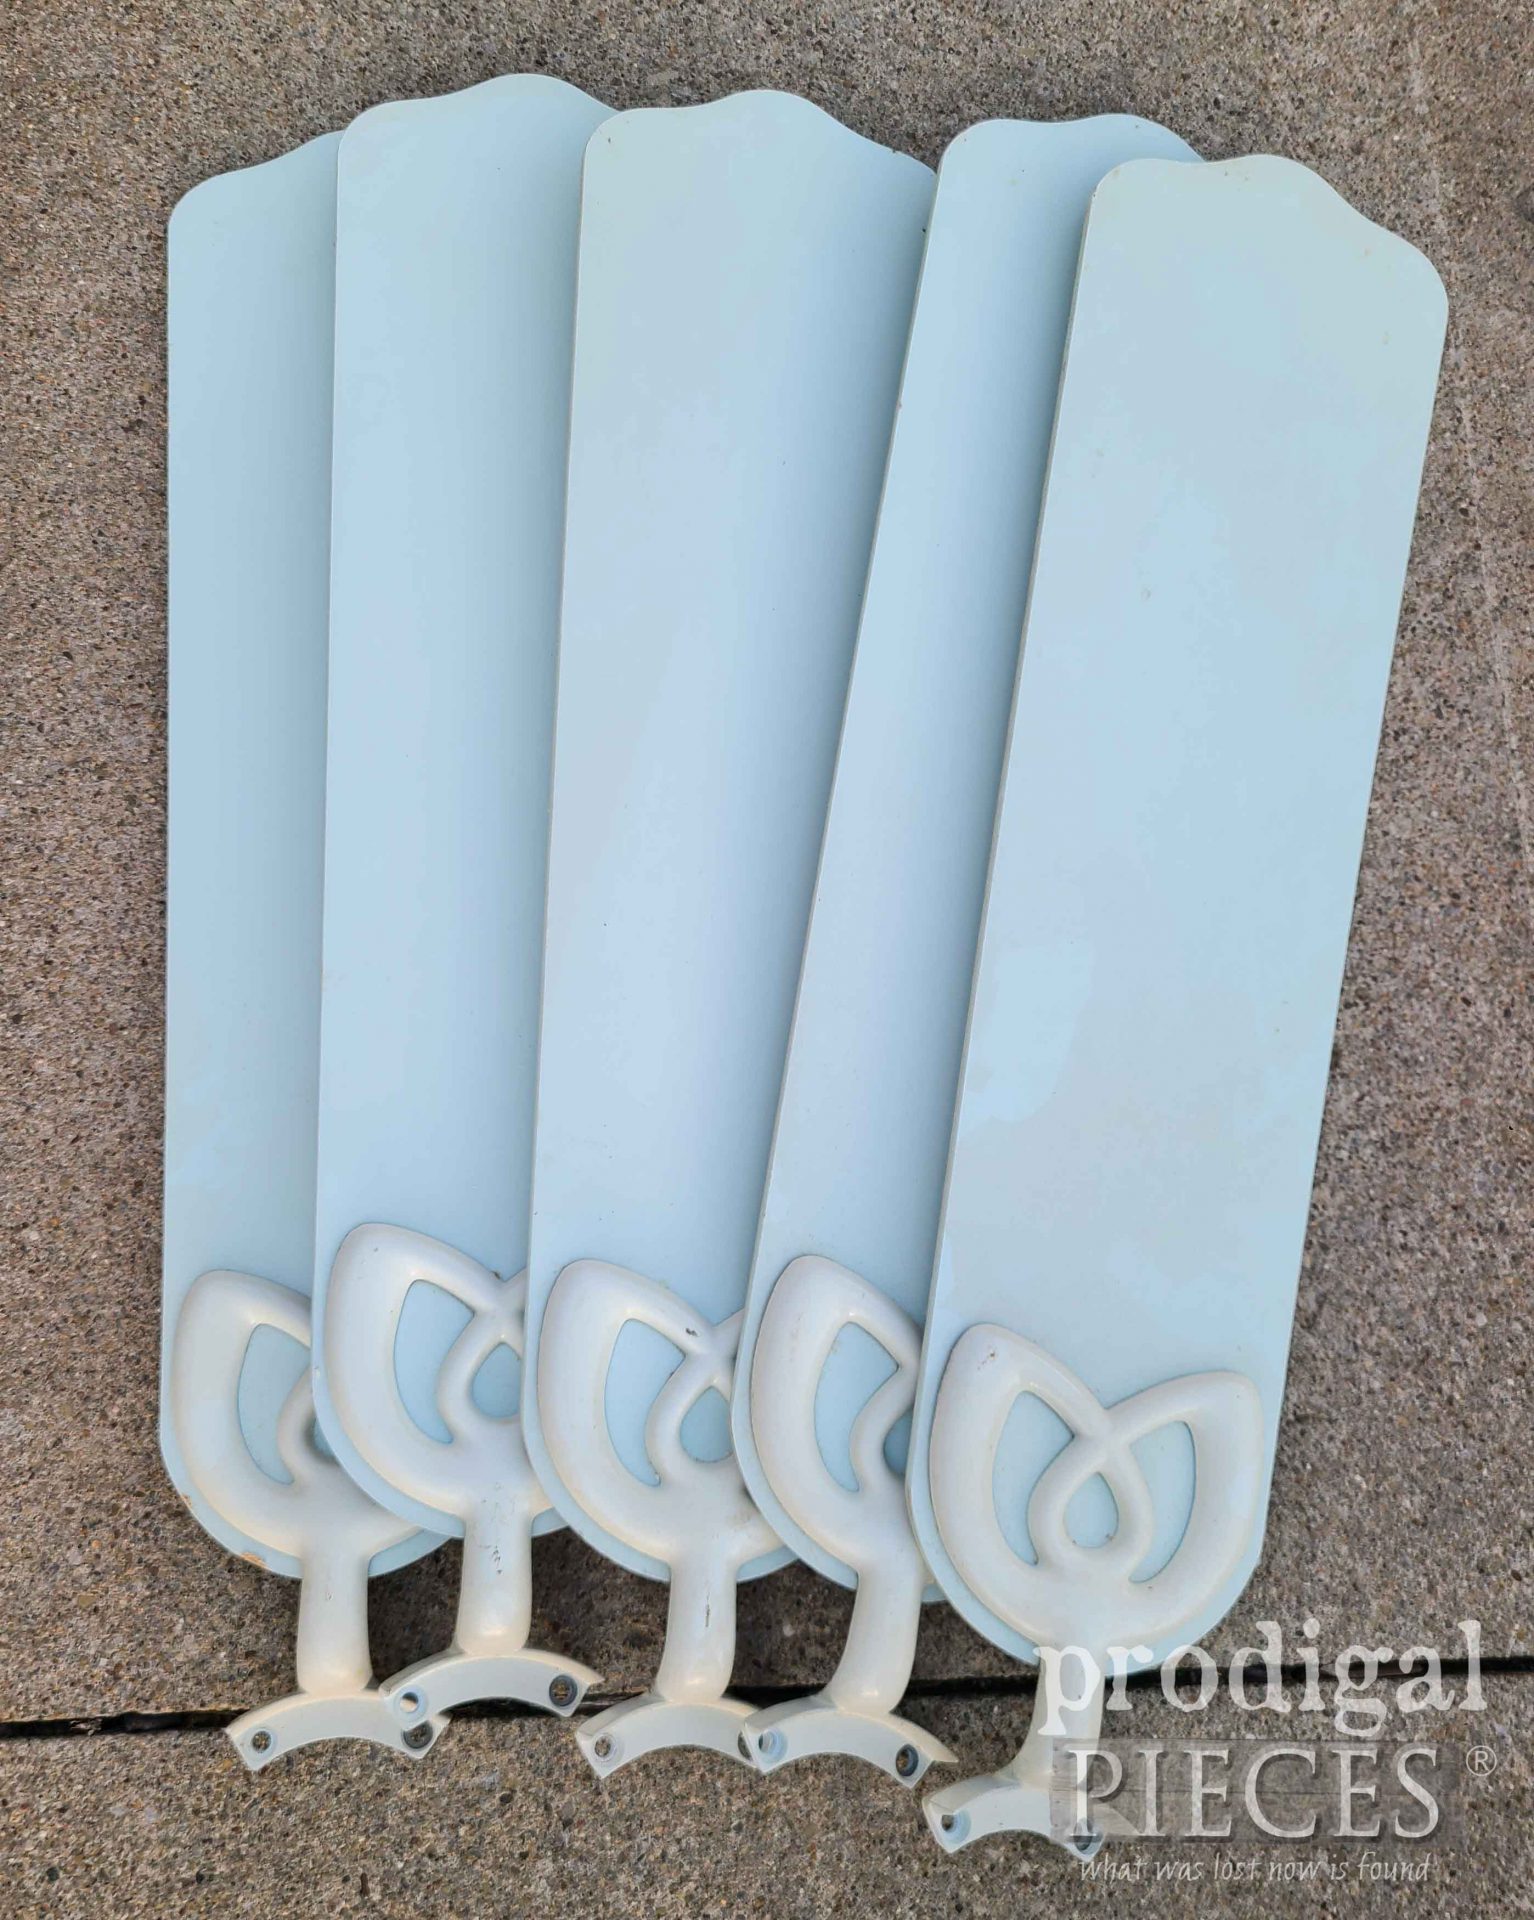 Trashed Fan Blades Before Upcycle by Larissa of Prodigal Pieces | prodigalpieces.com